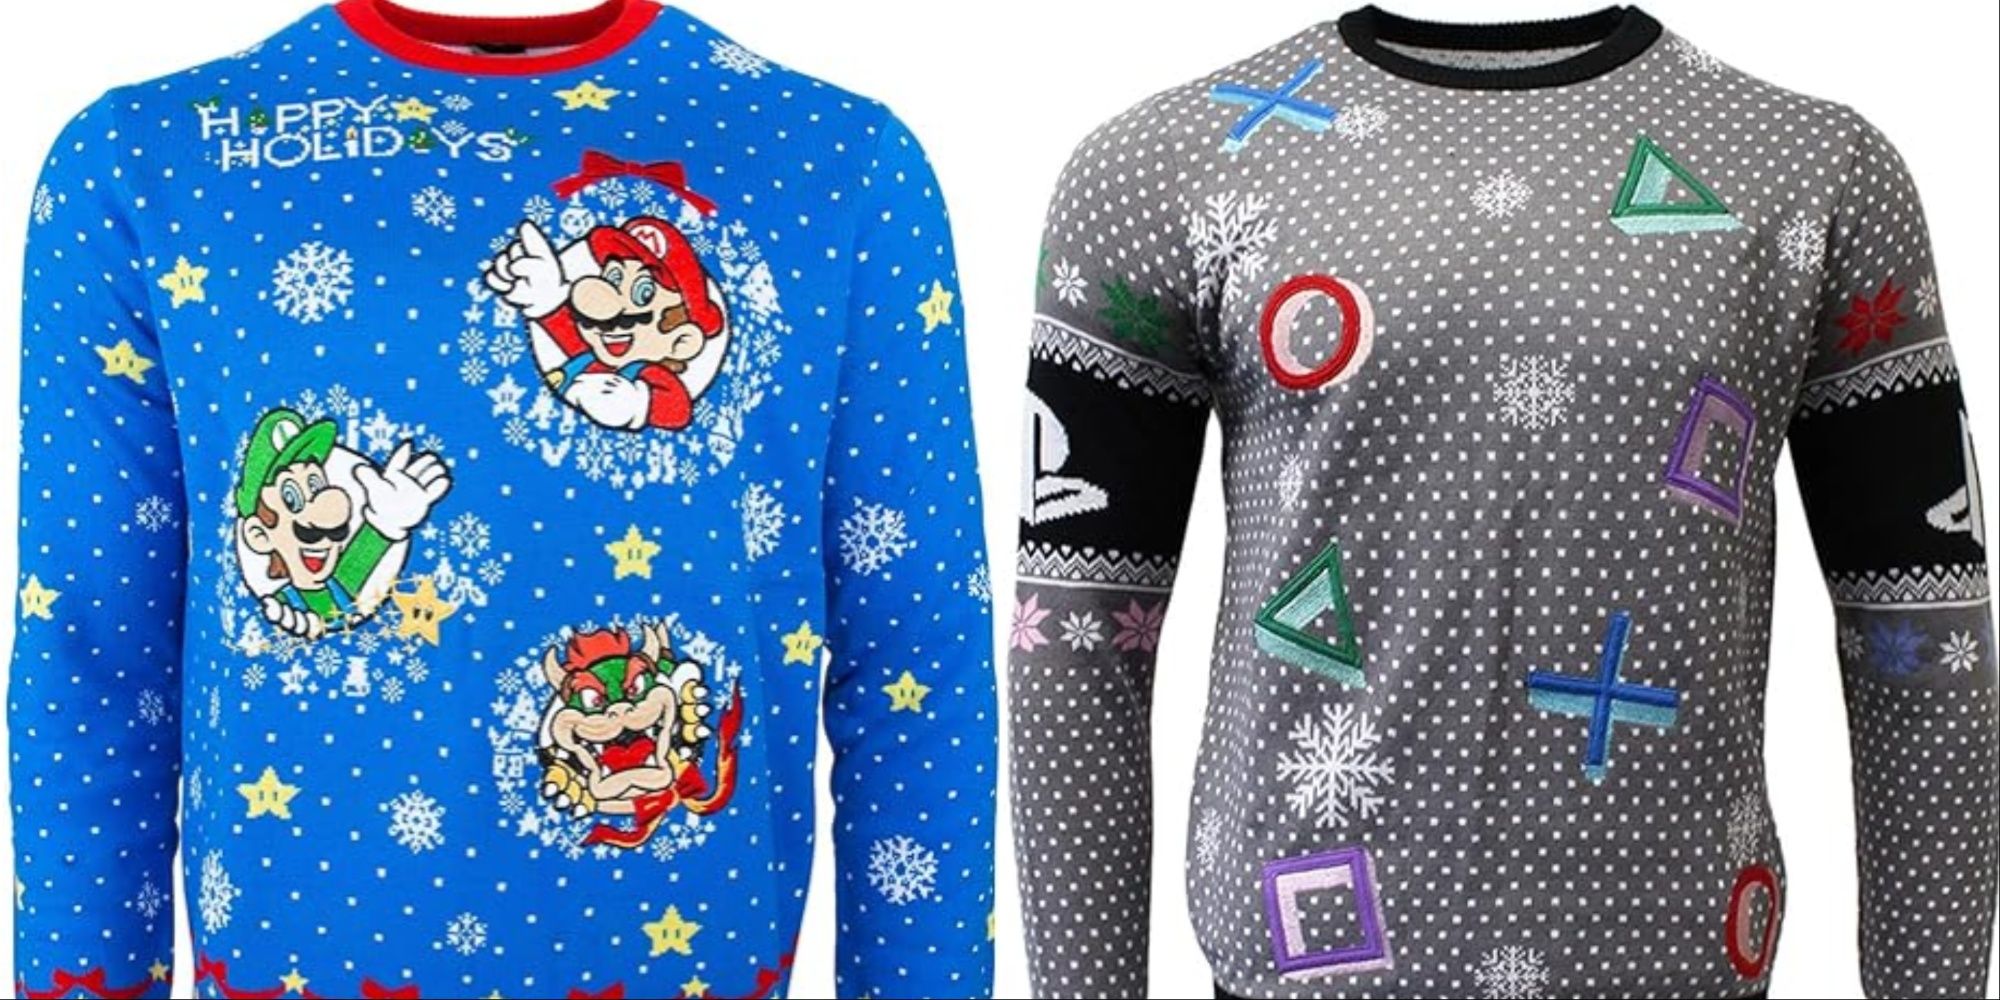 Gaming Christmas Jumper Featured Split Image Mario Christmas Jumper and PlayStation Christmas Jumper